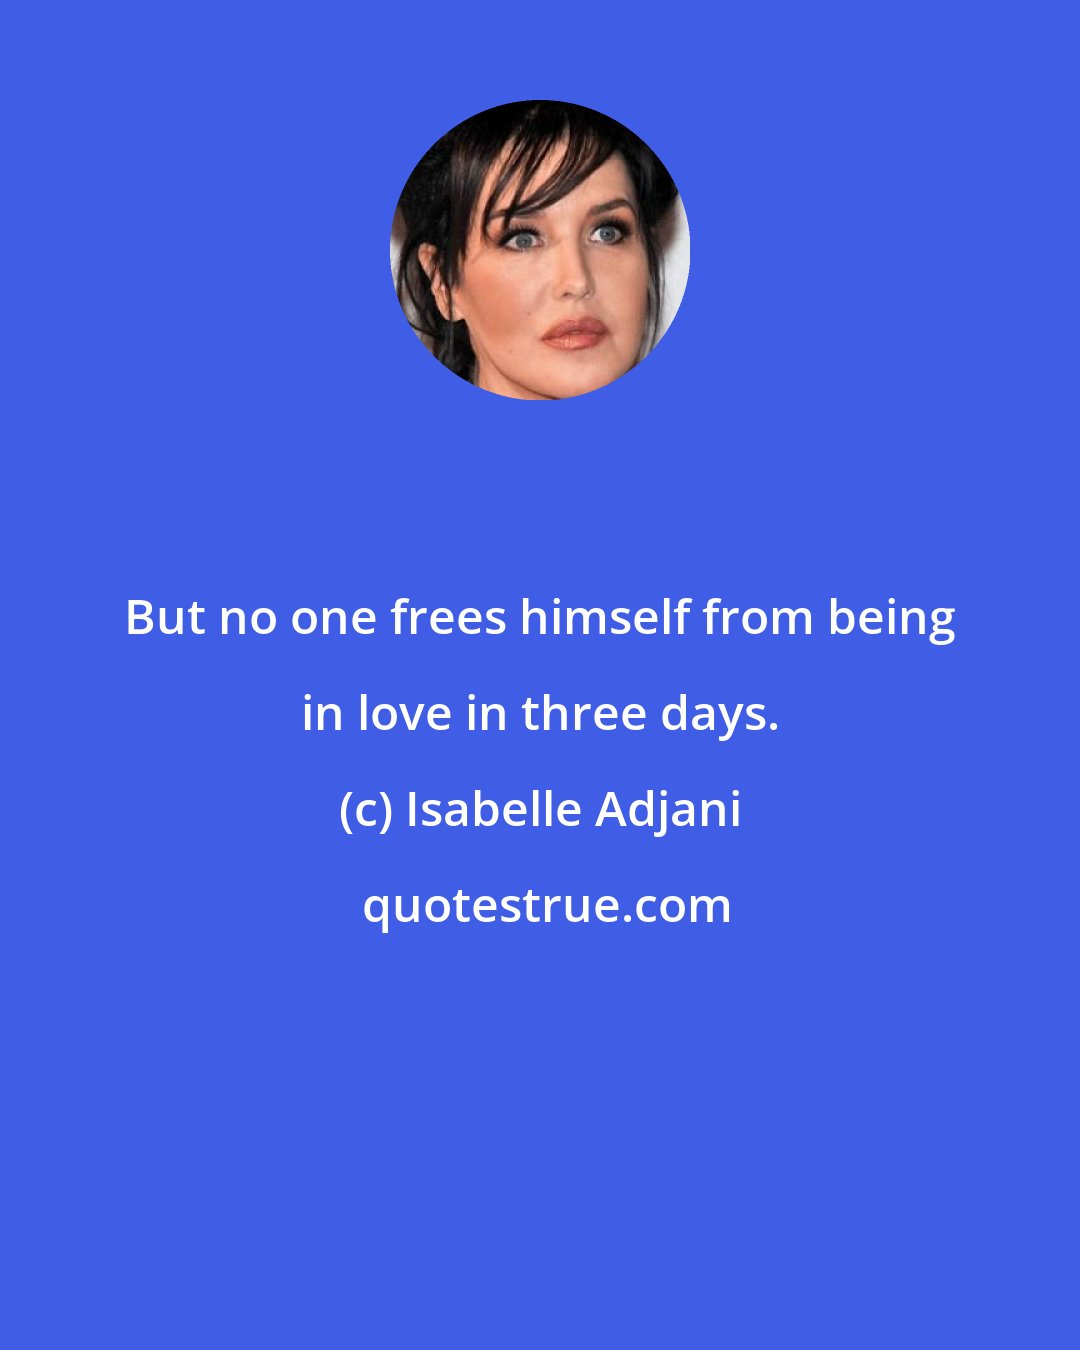 Isabelle Adjani: But no one frees himself from being in love in three days.